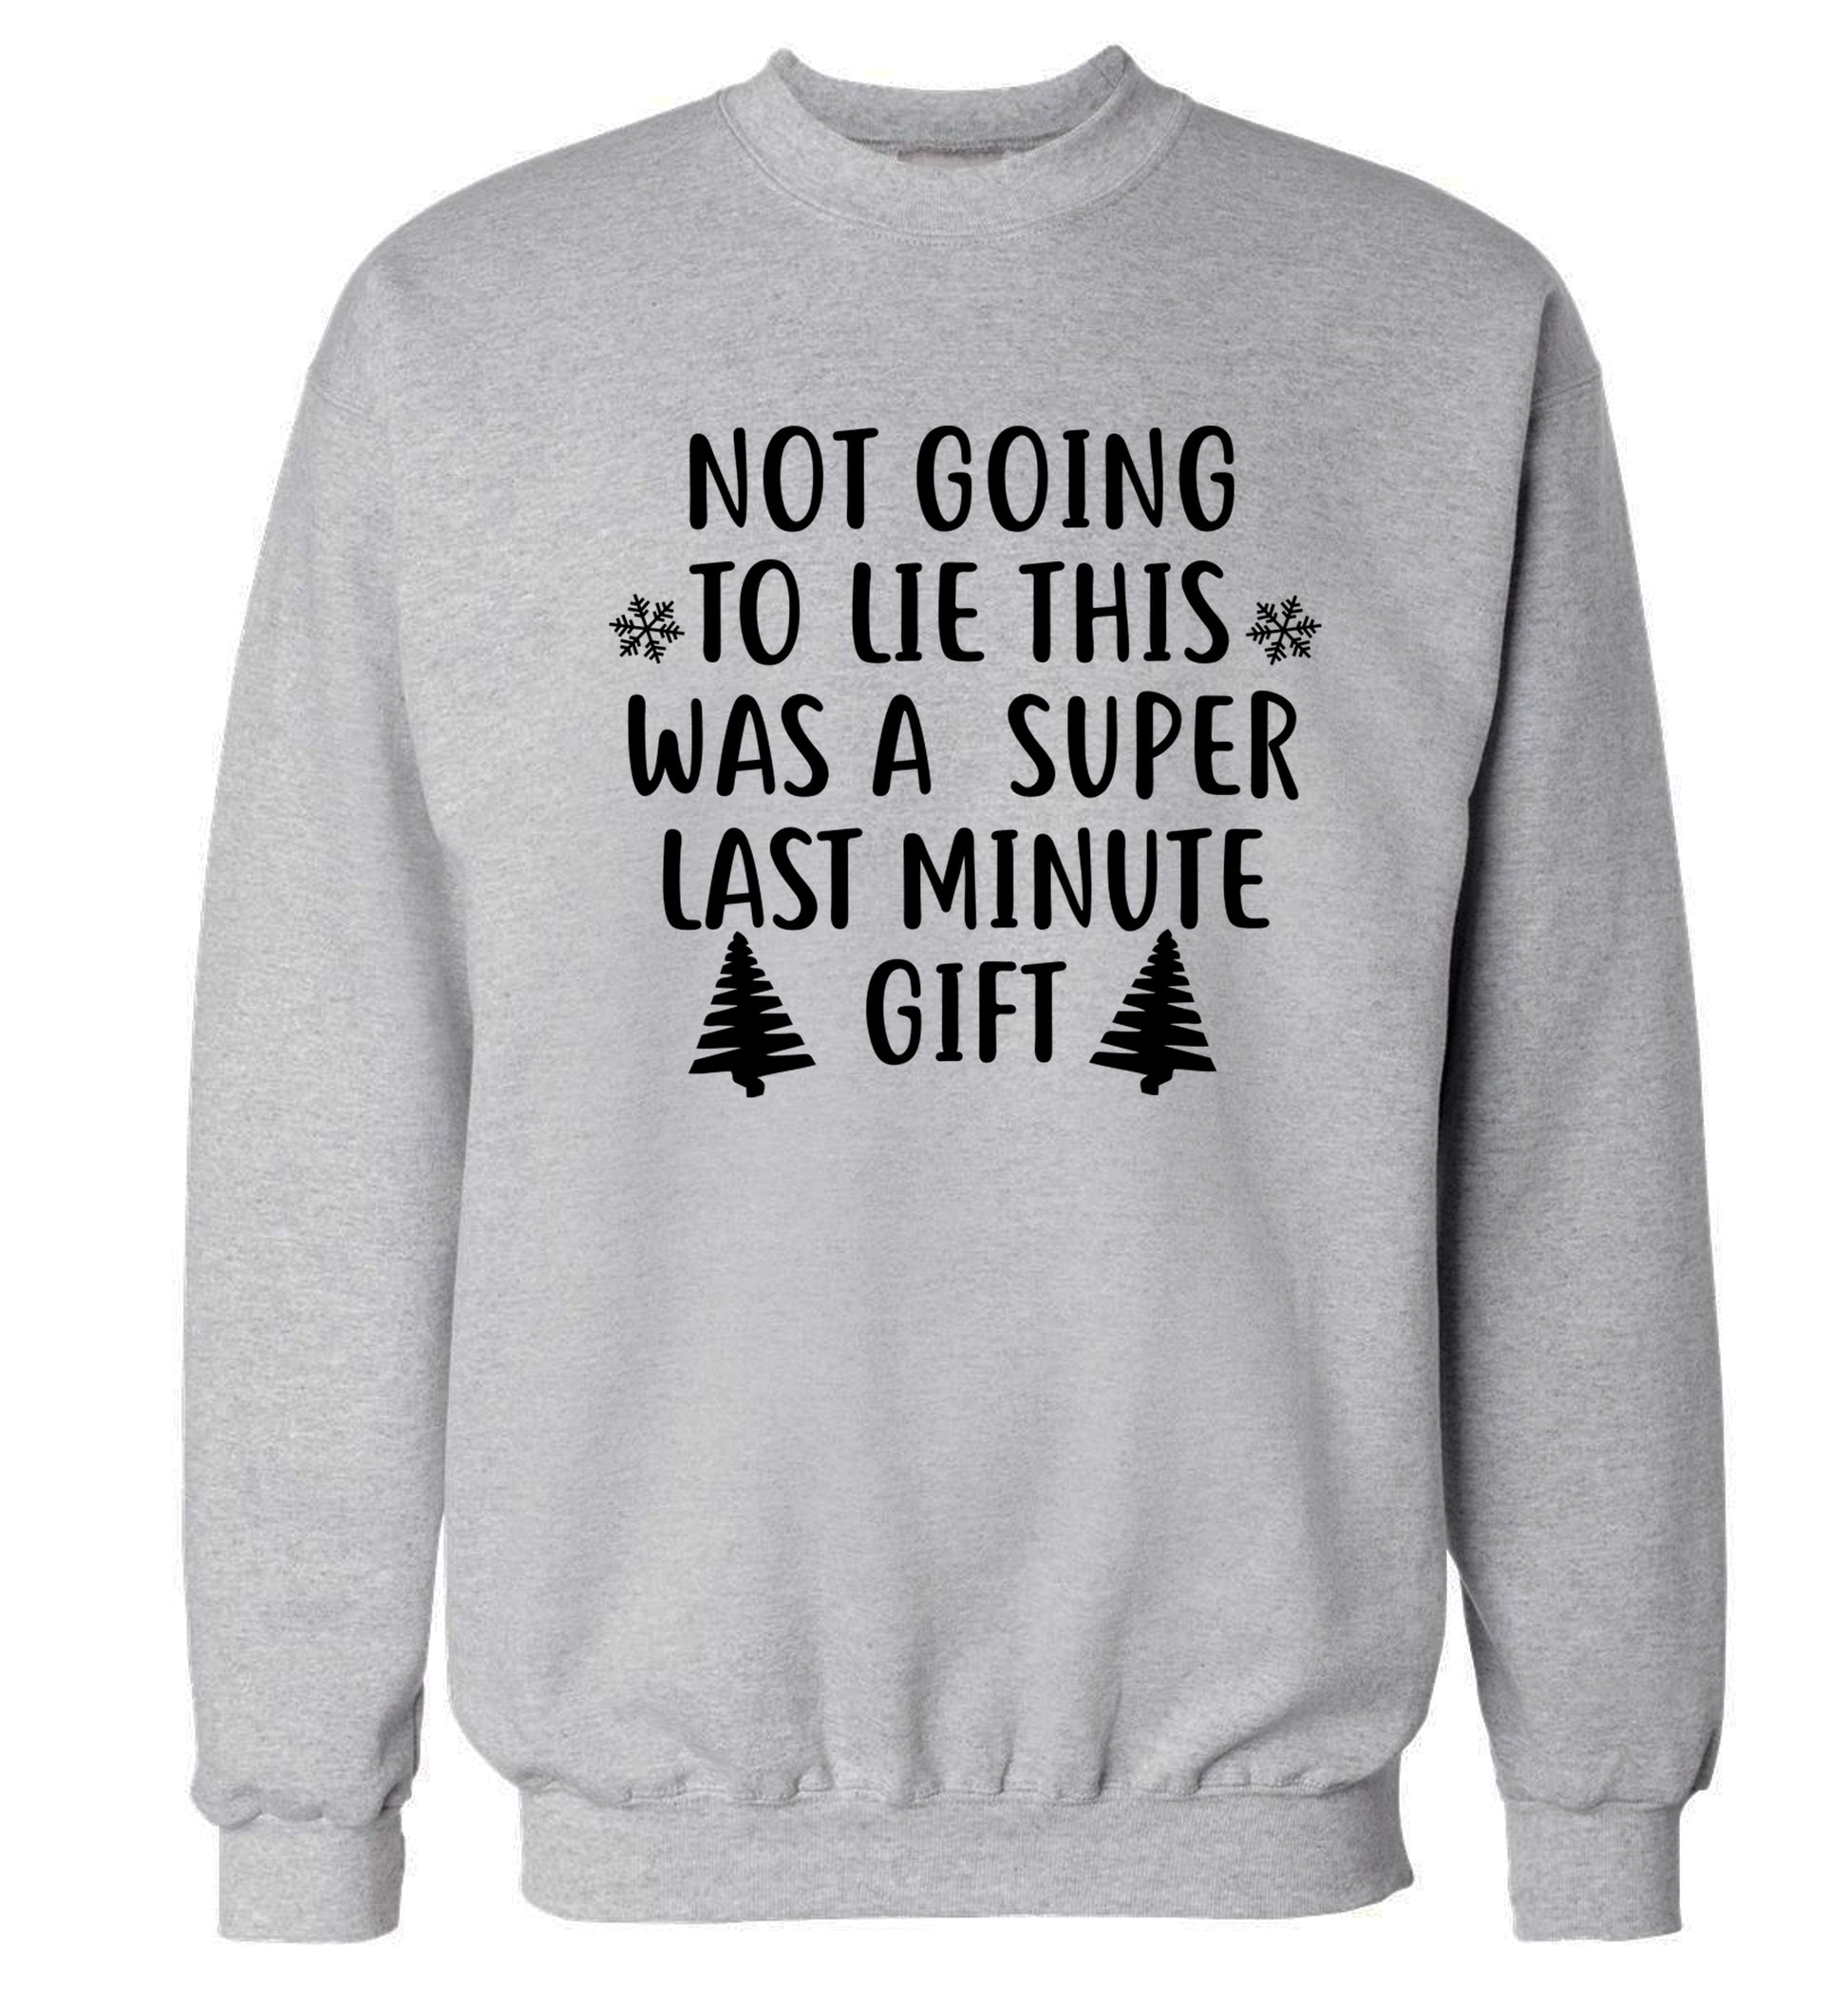 Not going to lie this was a super last minute gift Adult's unisex grey Sweater 2XL